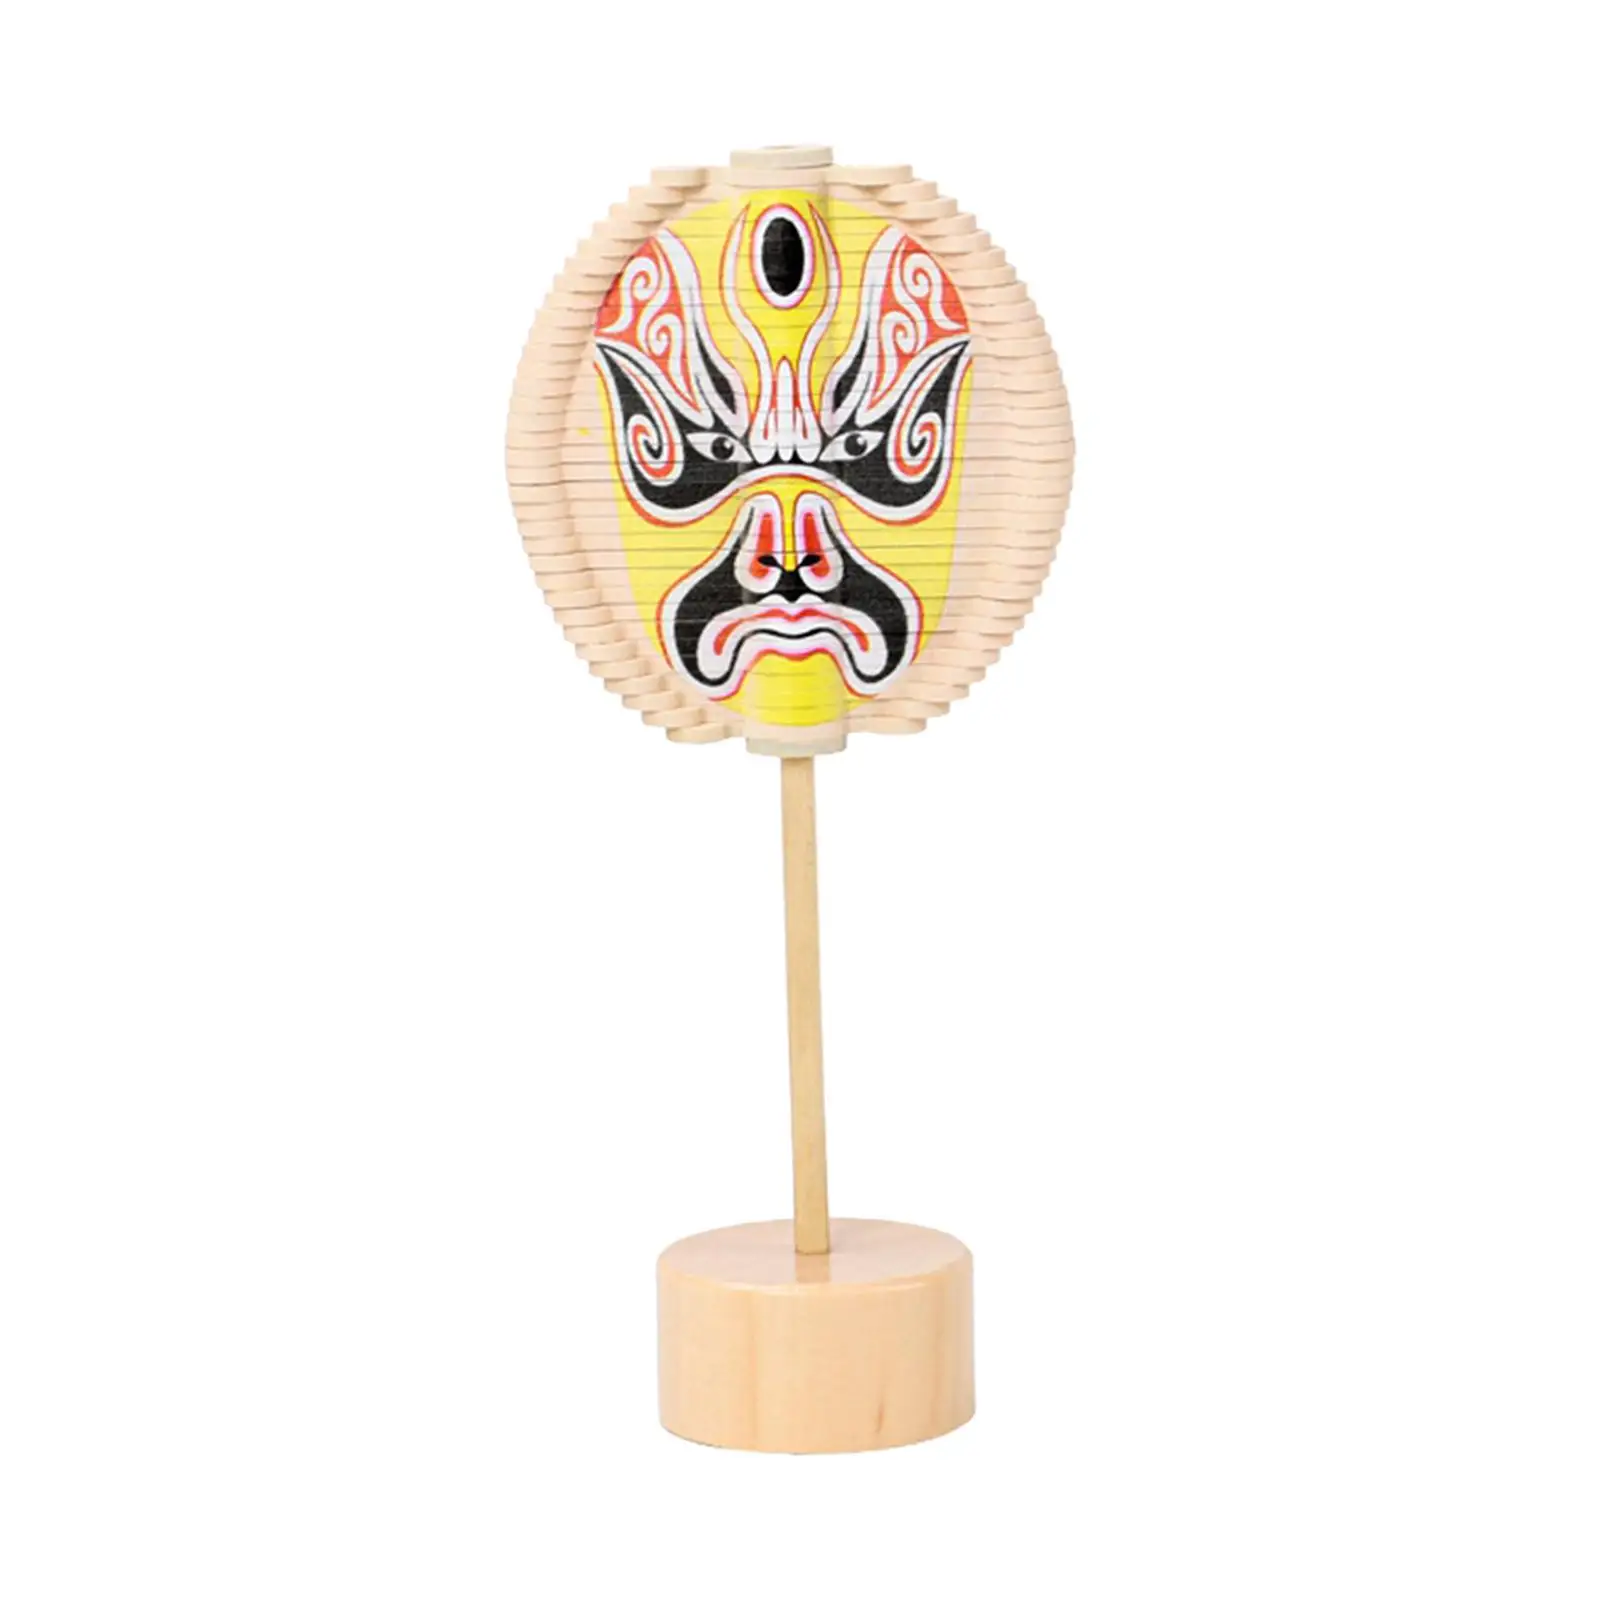 Funny Face Changing Rotating Lollipop Sensory Toys Gadget Vent Toys Wooden Rotating Spiral Lollipop for Party Office Christmas